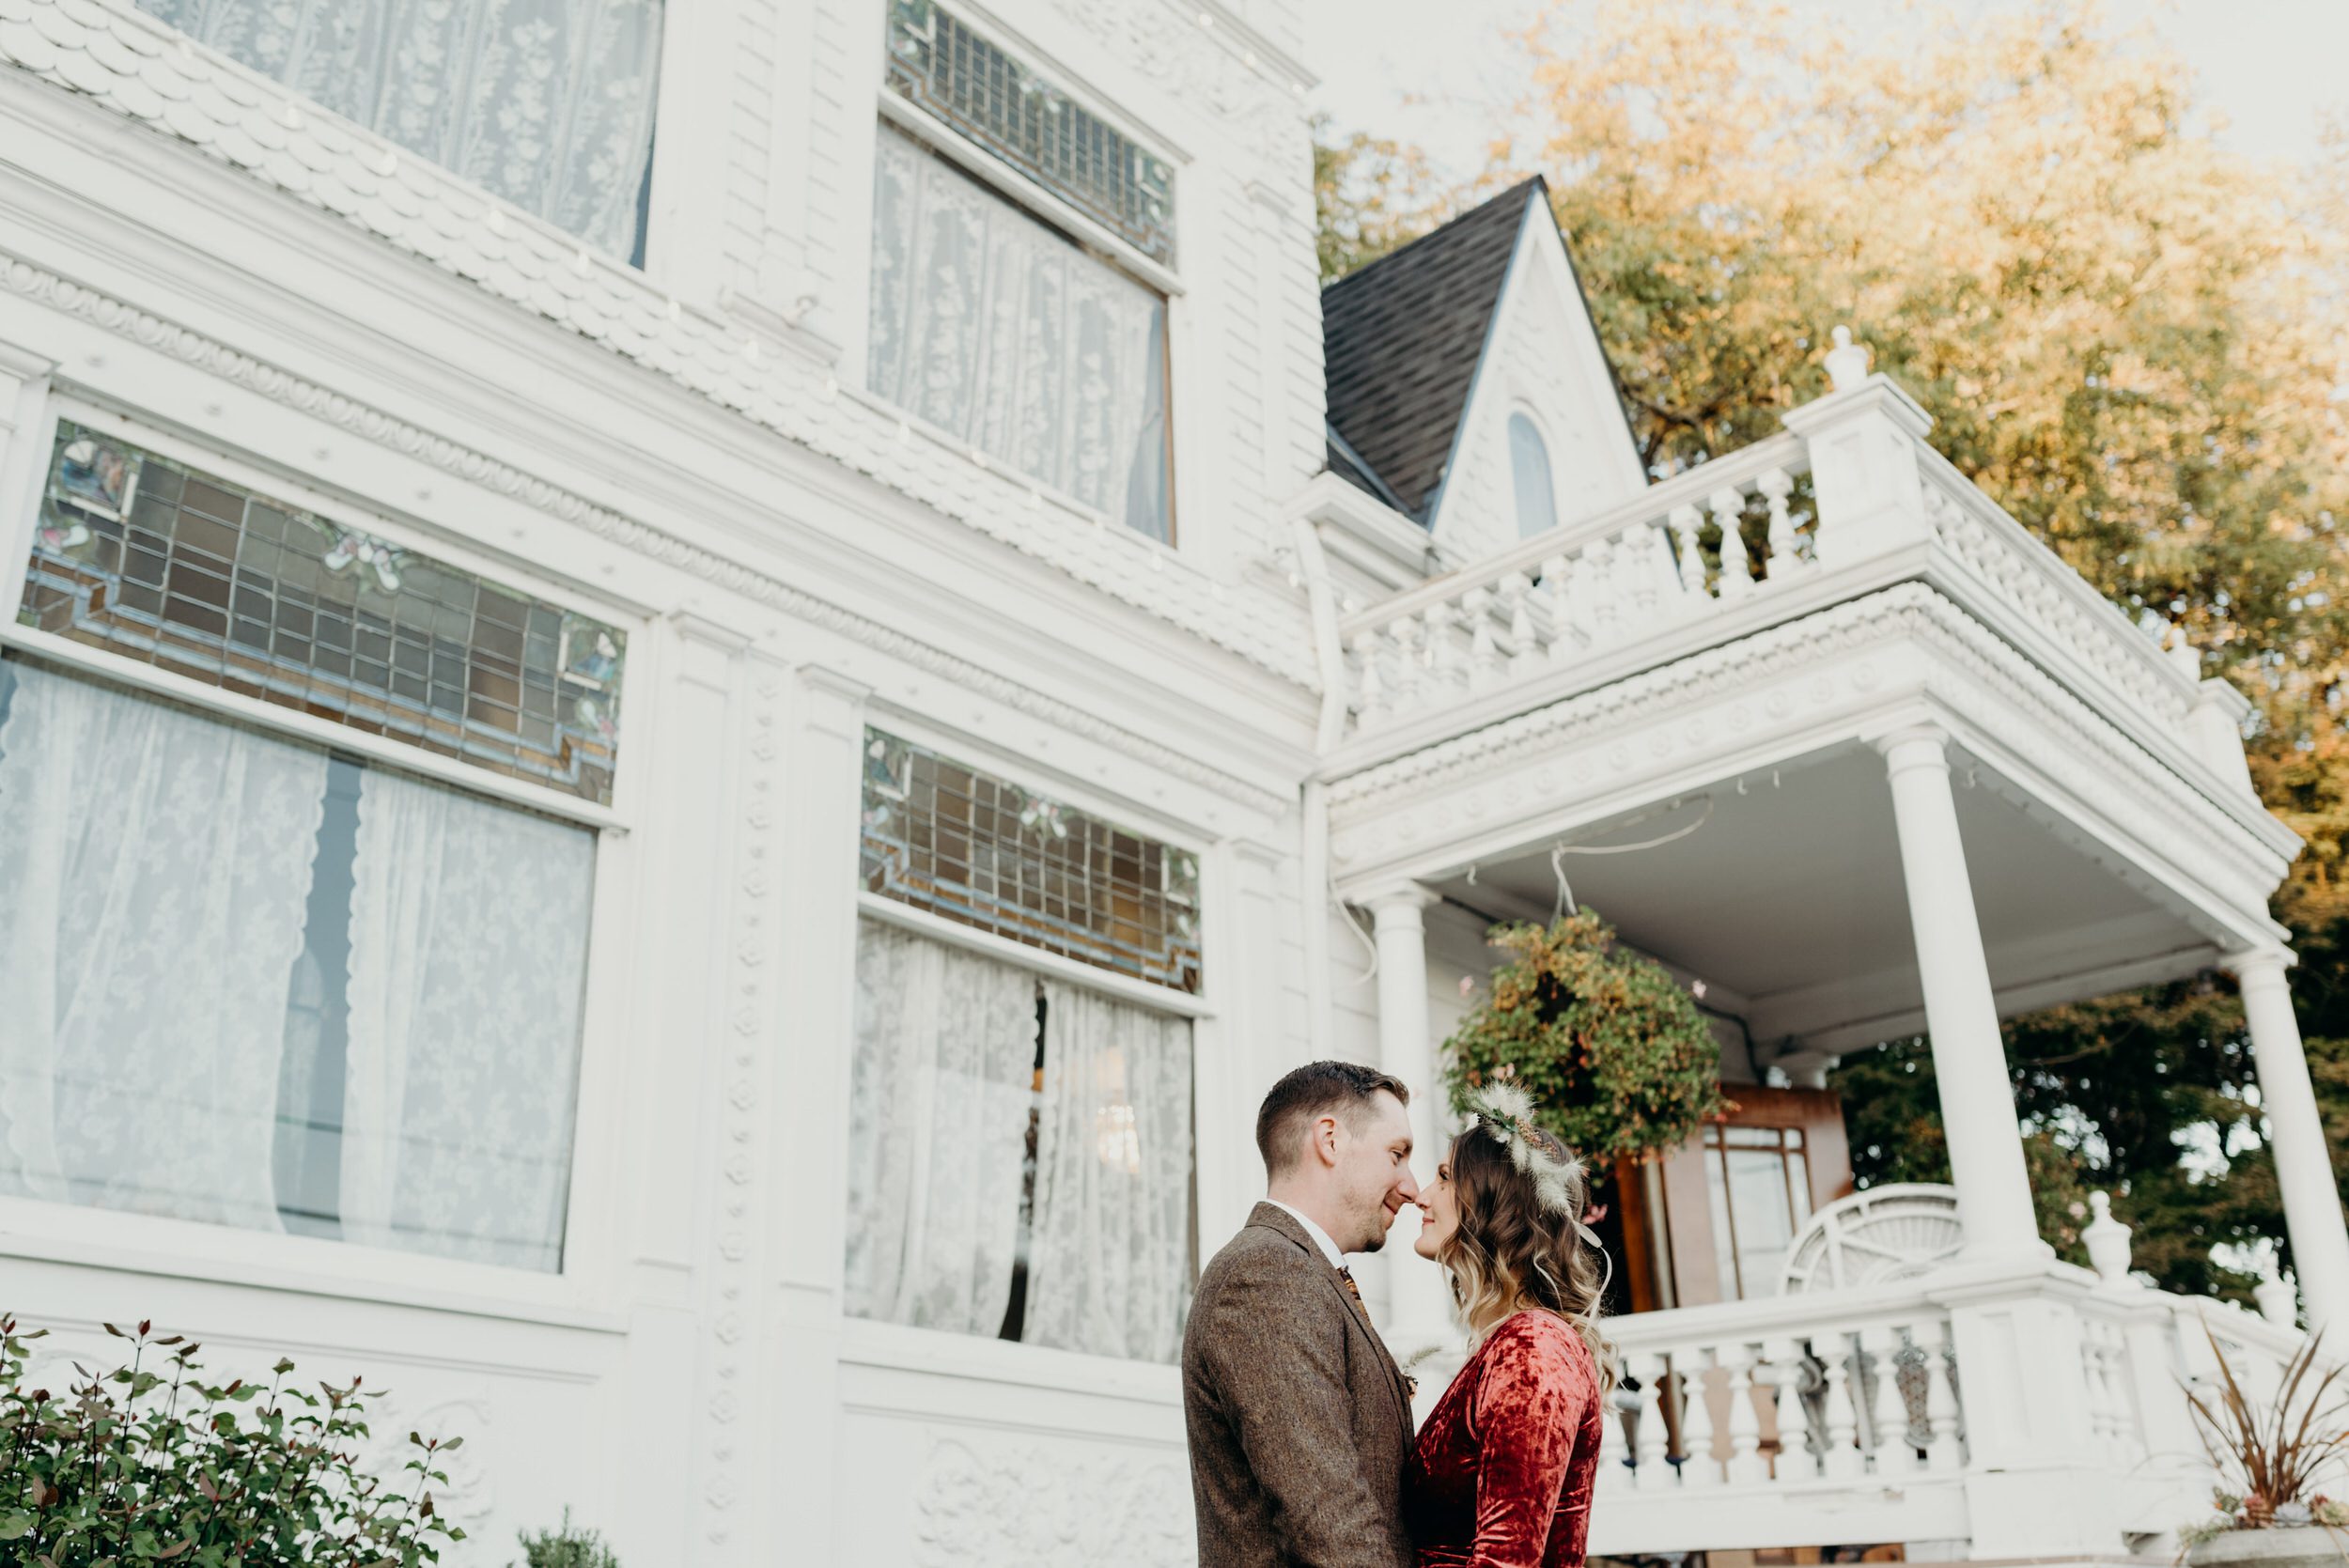 A wedding at the Victorian Belle Mansion venue.